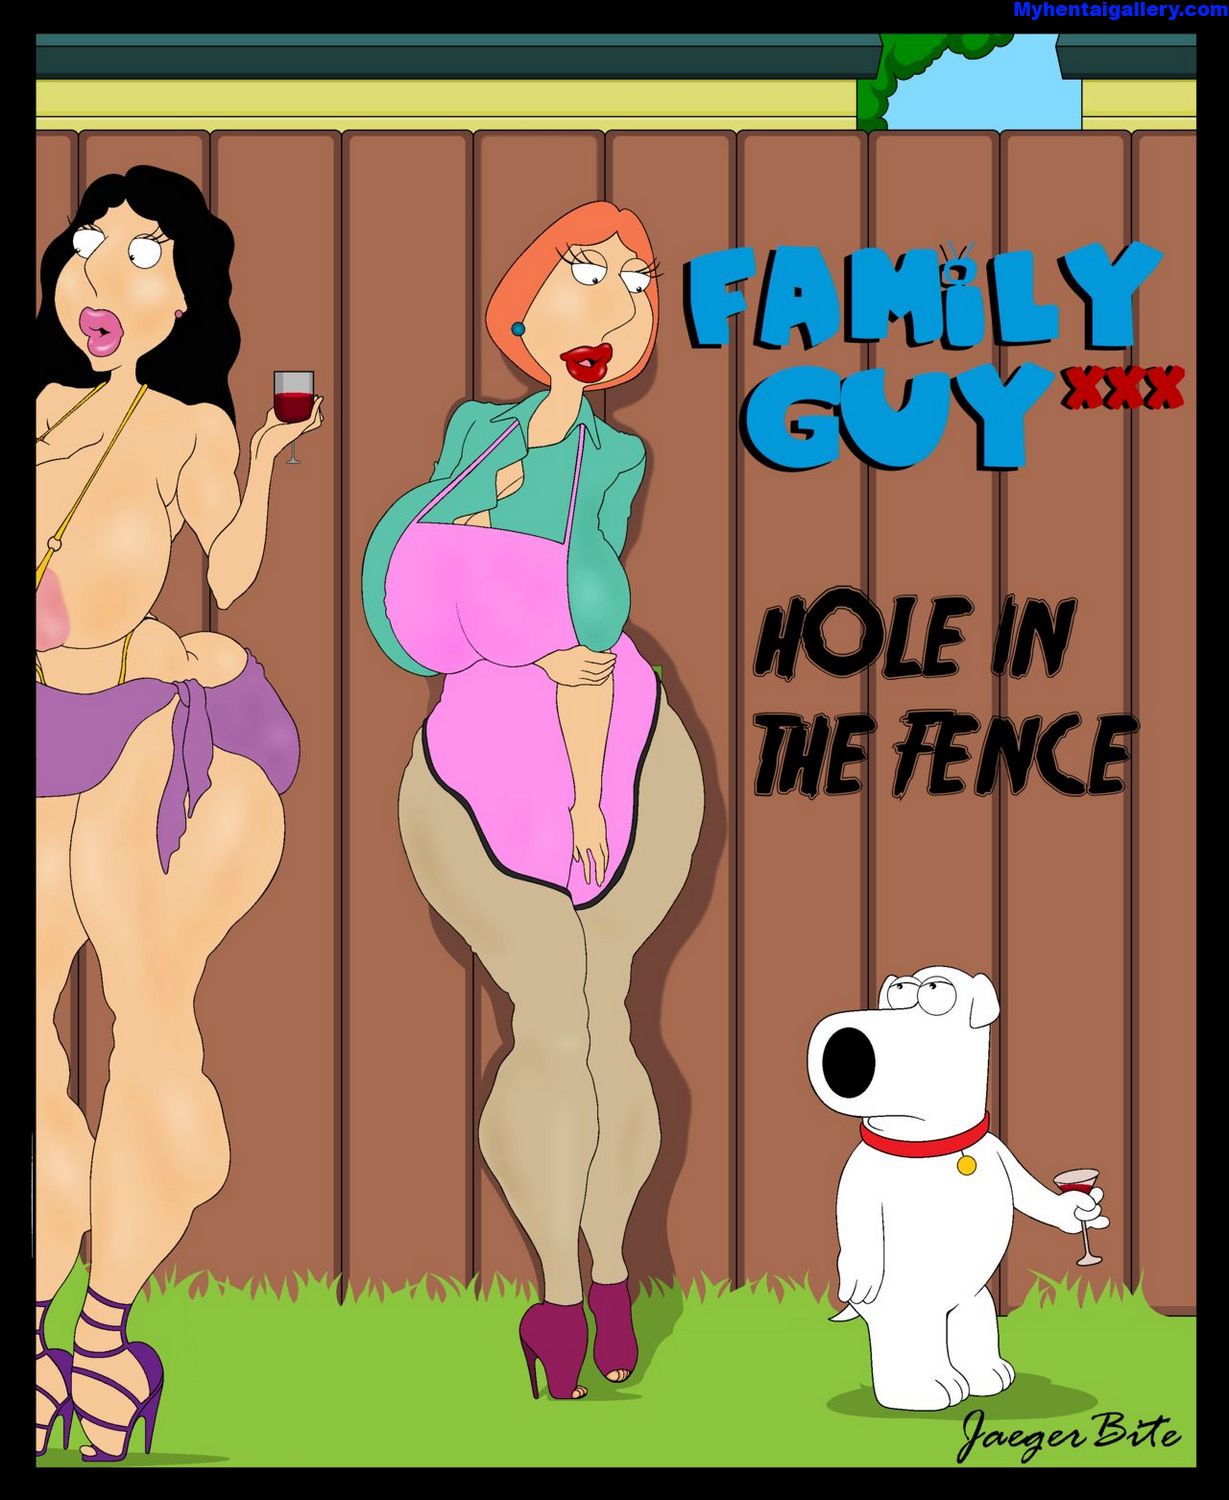 Family Guy Xxx Porn - Family Guy XXX - Hole In The Fence - MyHentaiGallery Free Porn Comics and  Sex Cartoons